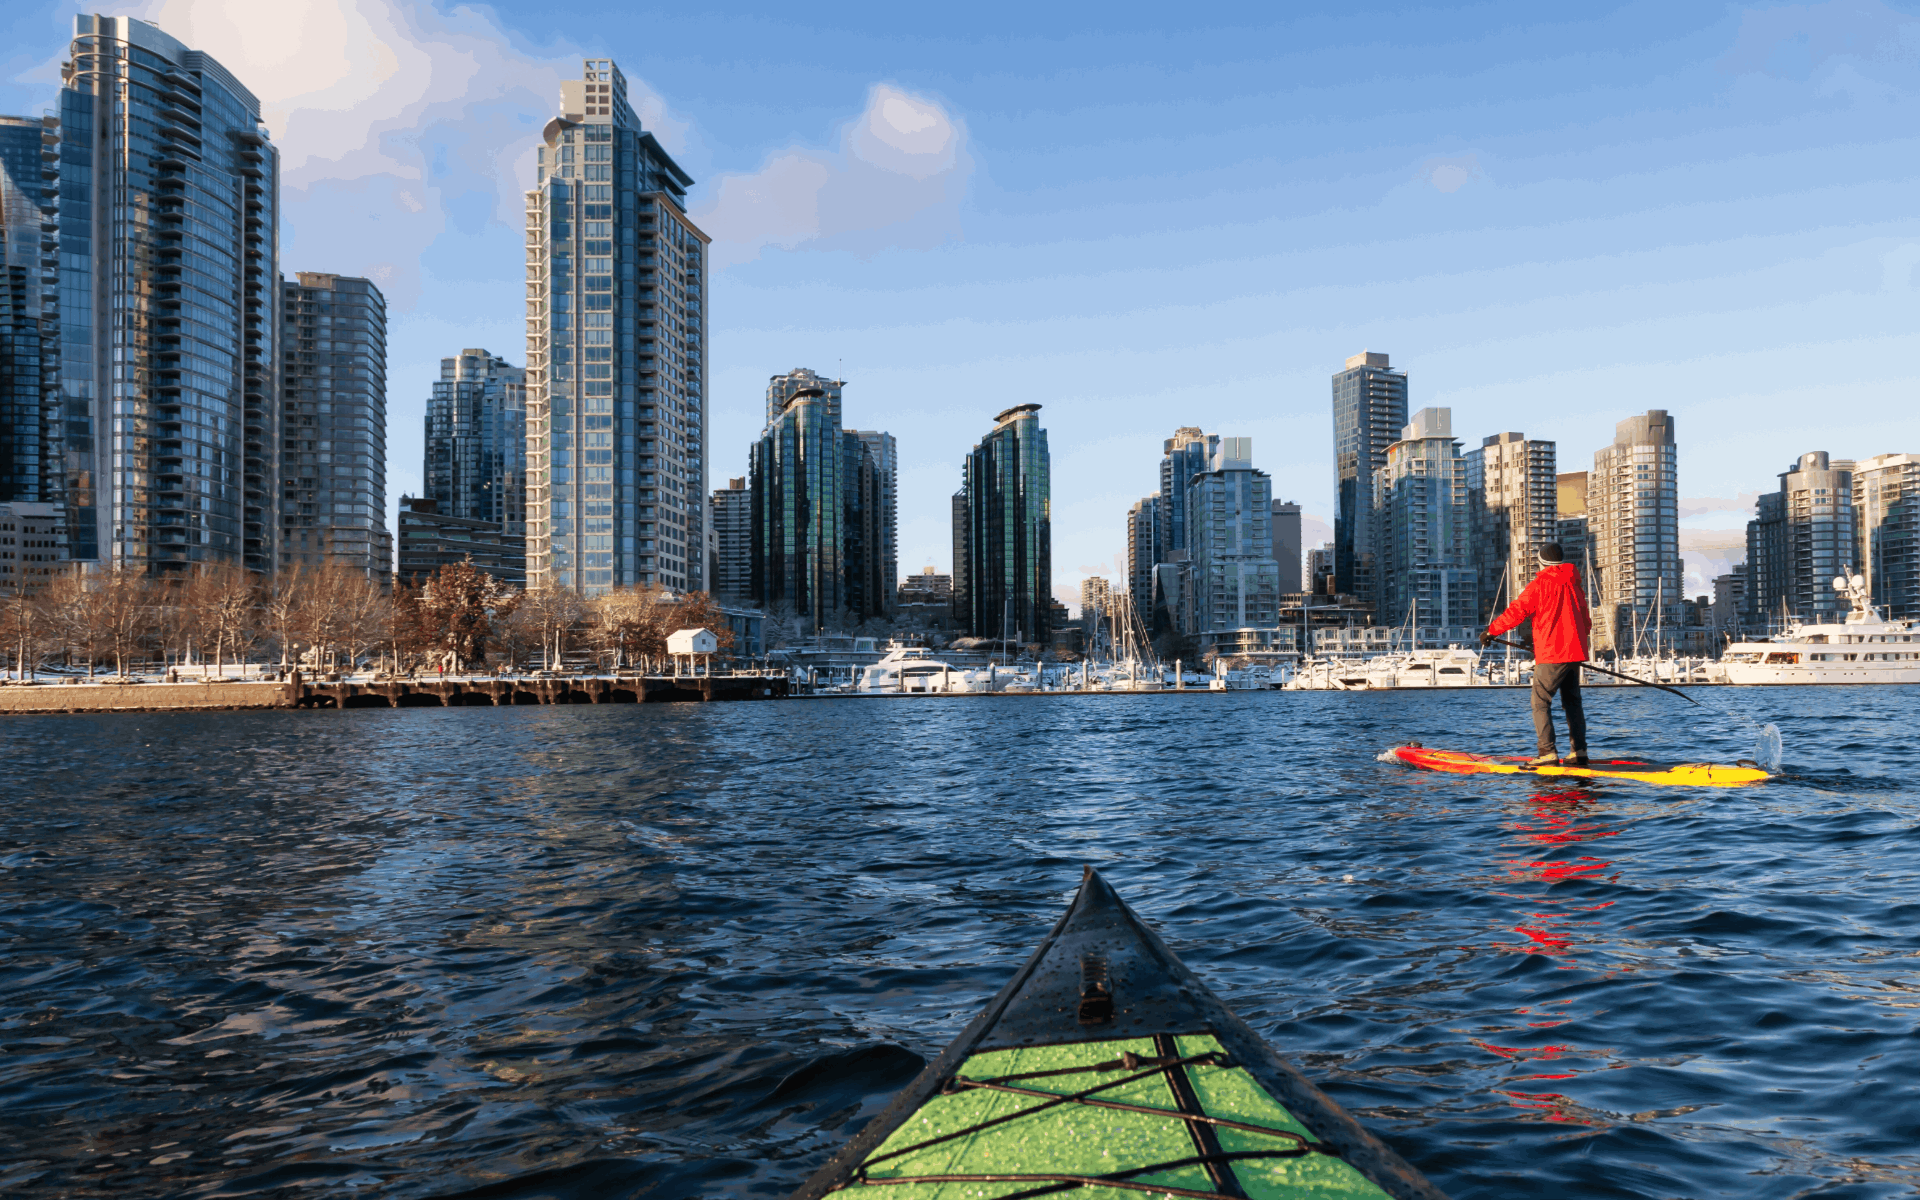 Kayakers in Vancouver, British Columbia harbour